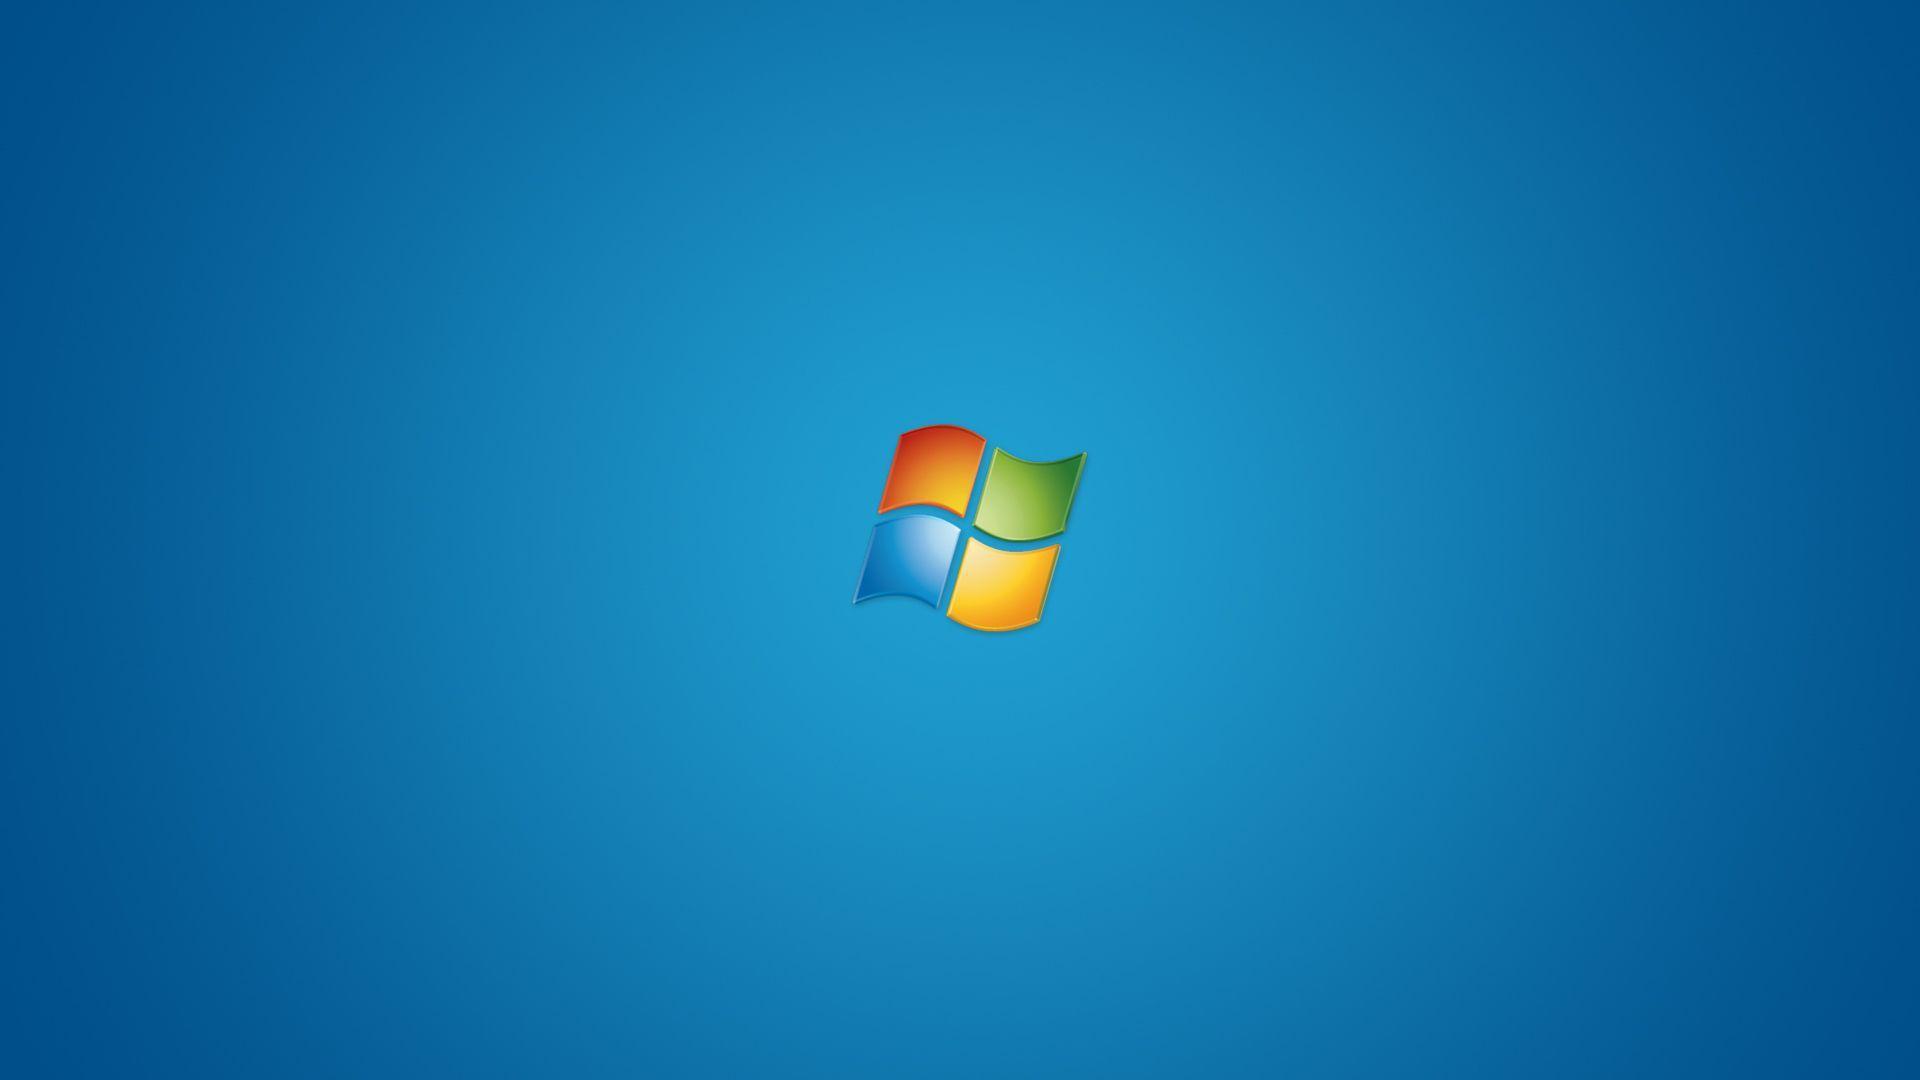 Image For > Microsoft Windows Wallpapers